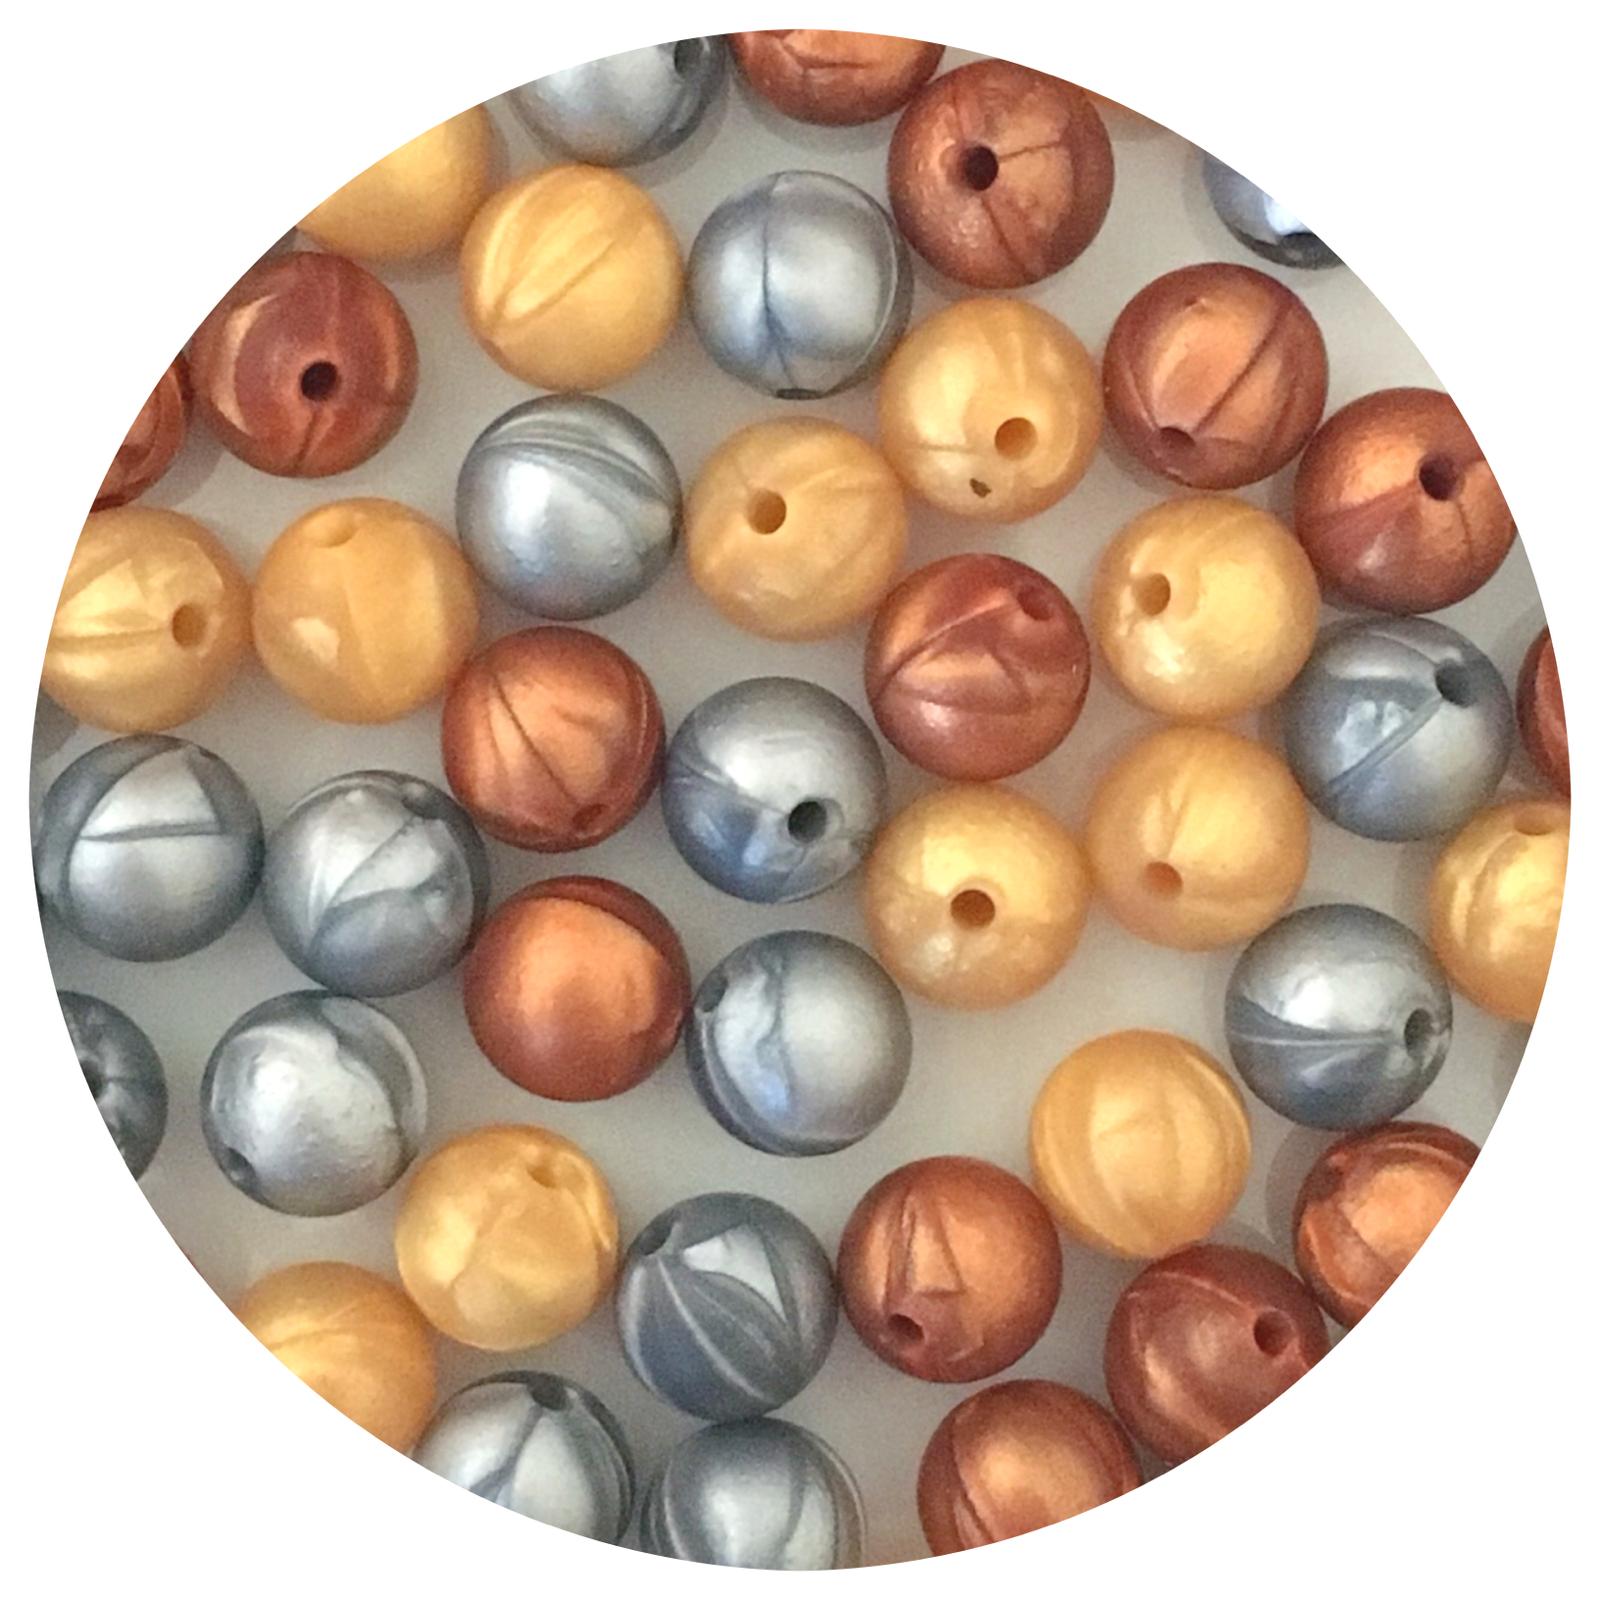 Metallic Mix - 12mm round Silicone Beads - Rose Copper, Silver & Pearl Gold - 30 Beads